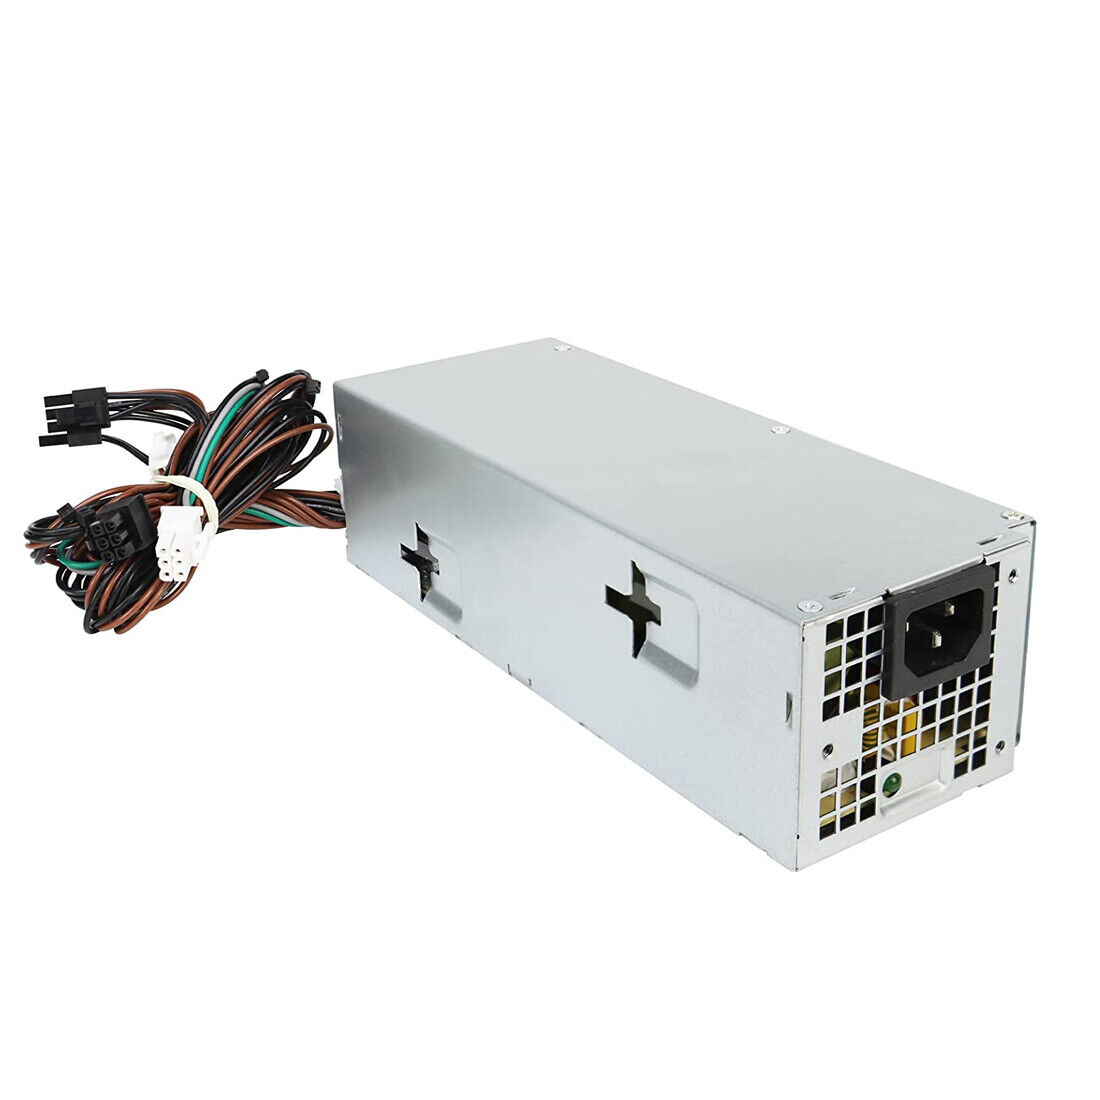 Nw 4FWF7 460W PSU Power Supply Fits Dell XPS 8940 MT 04FWF7 H460EGM-00 D460E001P